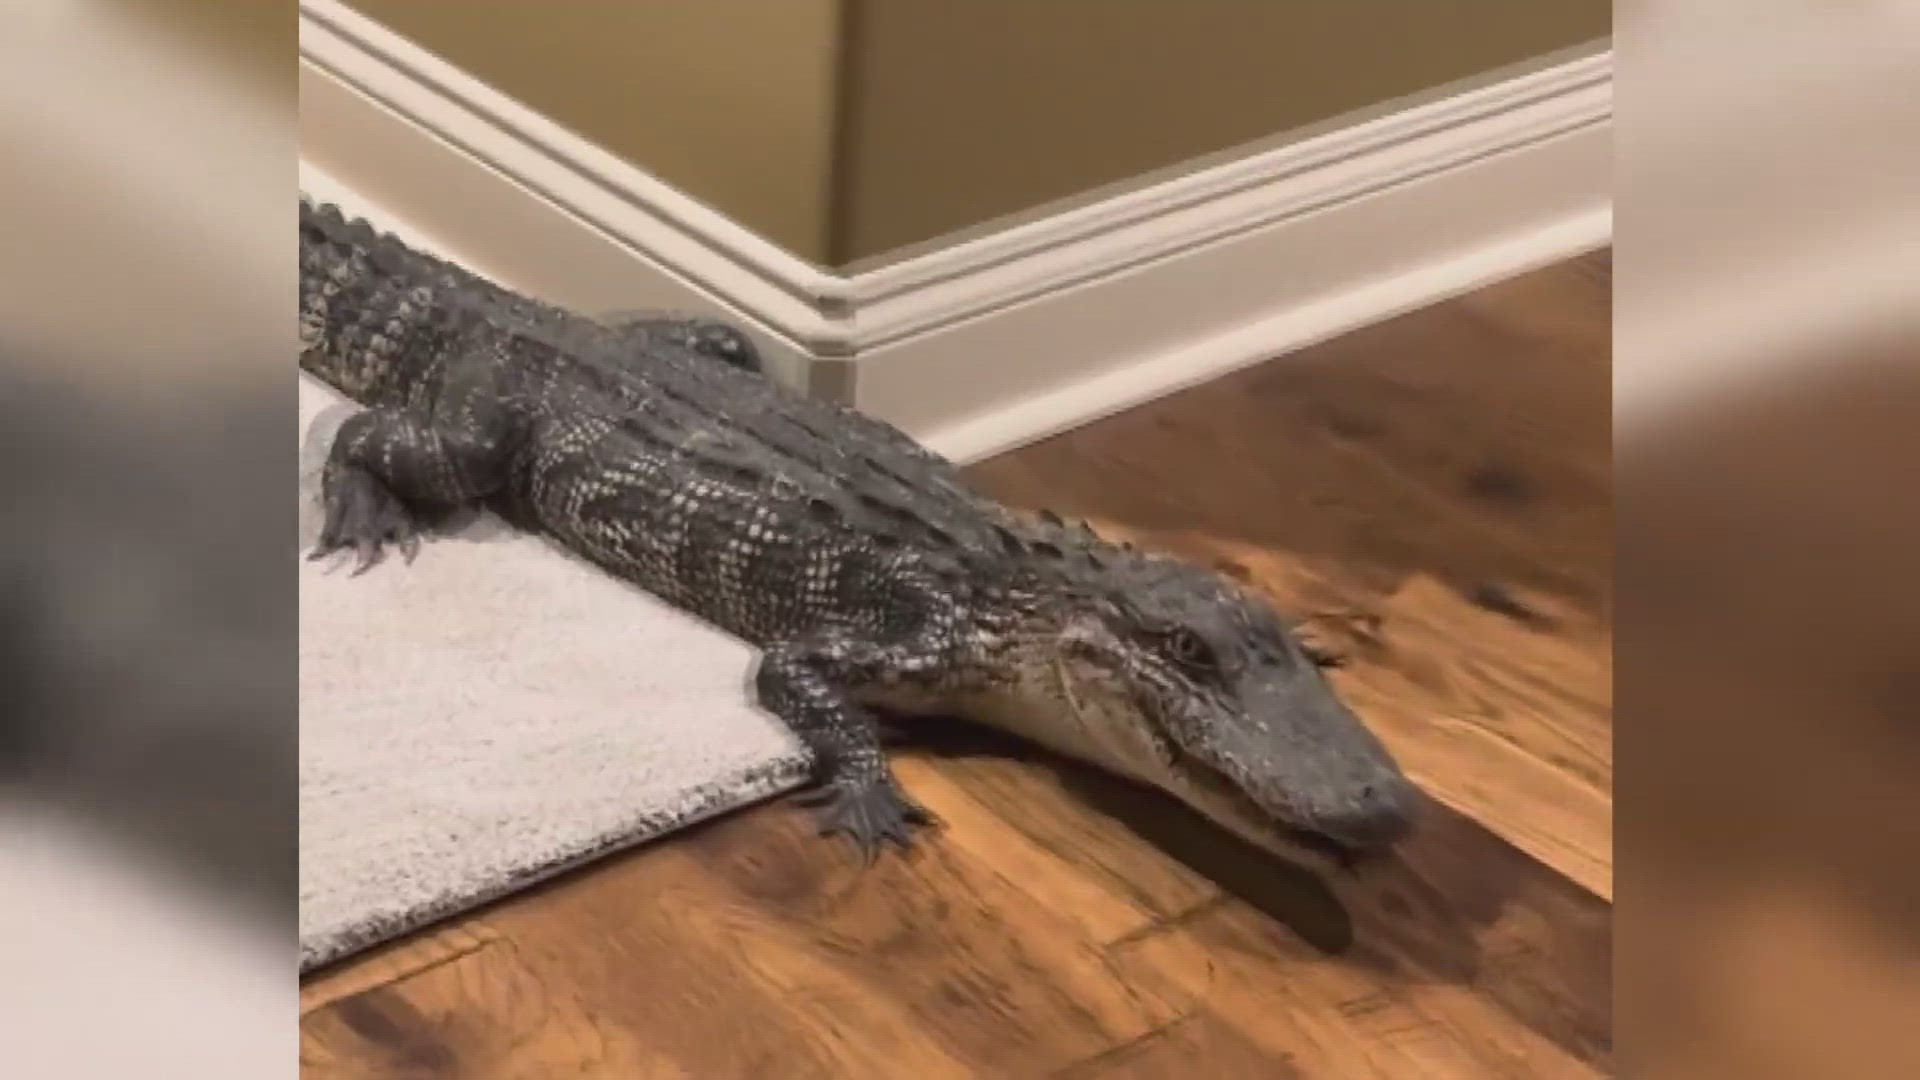 Don and Jan Schultz moved to Louisiana from Yuma in February. They recently got a surprise visit from an alligator.